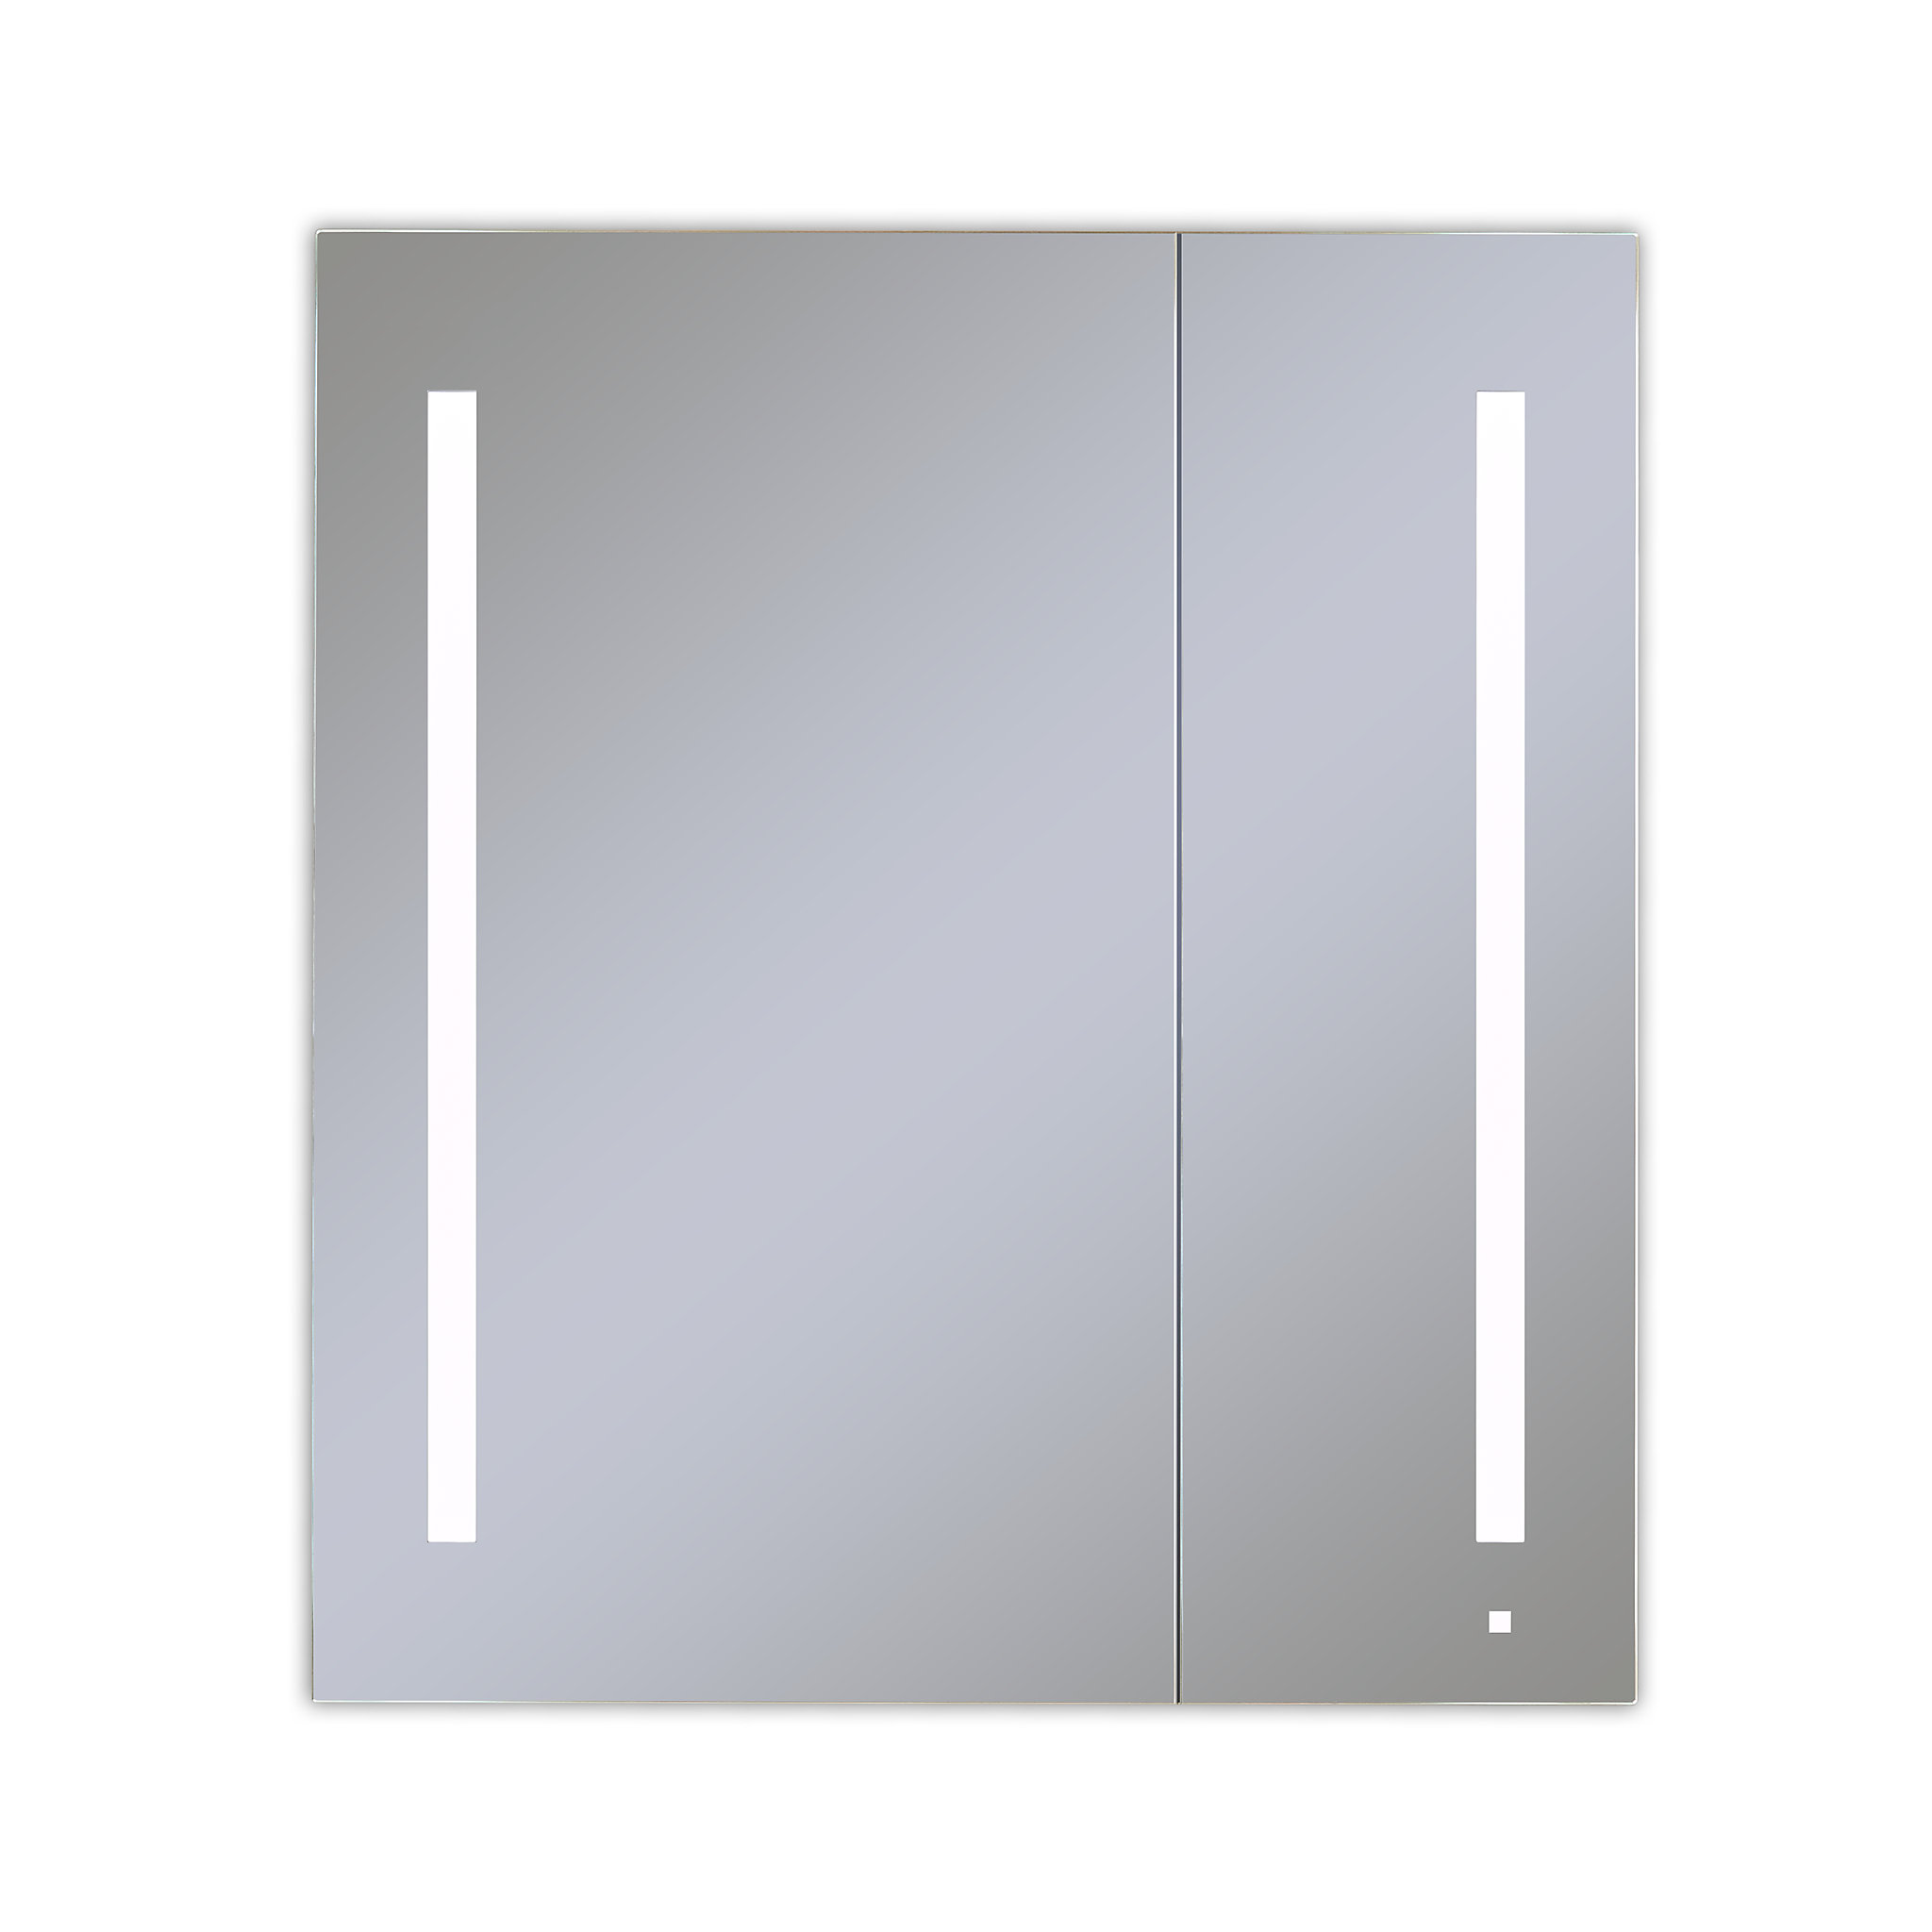 Robern AC3640D4P2L AiO Lighted Cabinet, 36" x 40" x 4", Two Door, LUM Lighting, 4000K Temperature (Cool Light), Dimmable, Electr